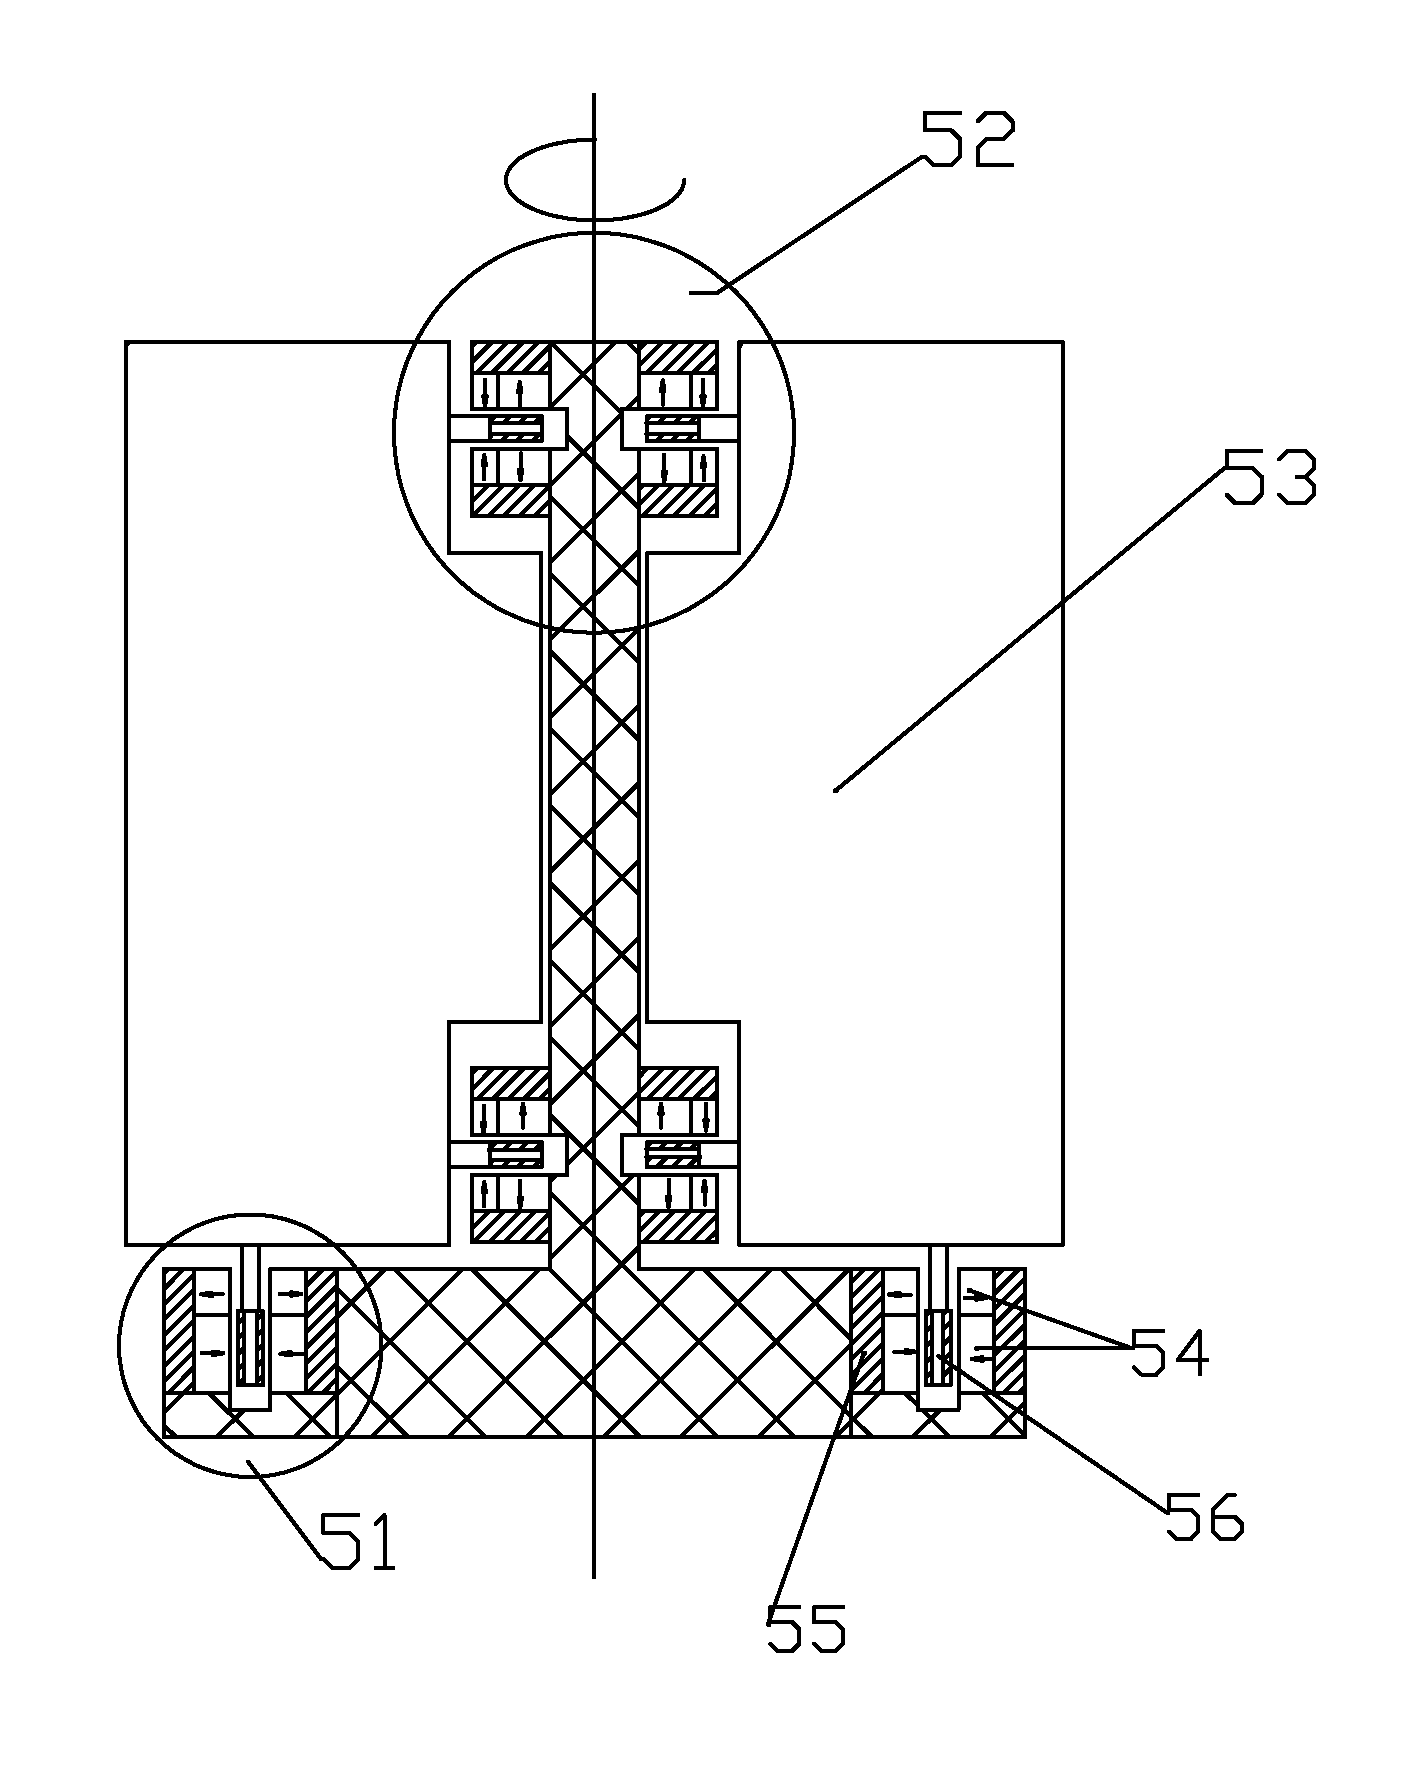 Magnetostatic levitation and propulsion systems for moving objects